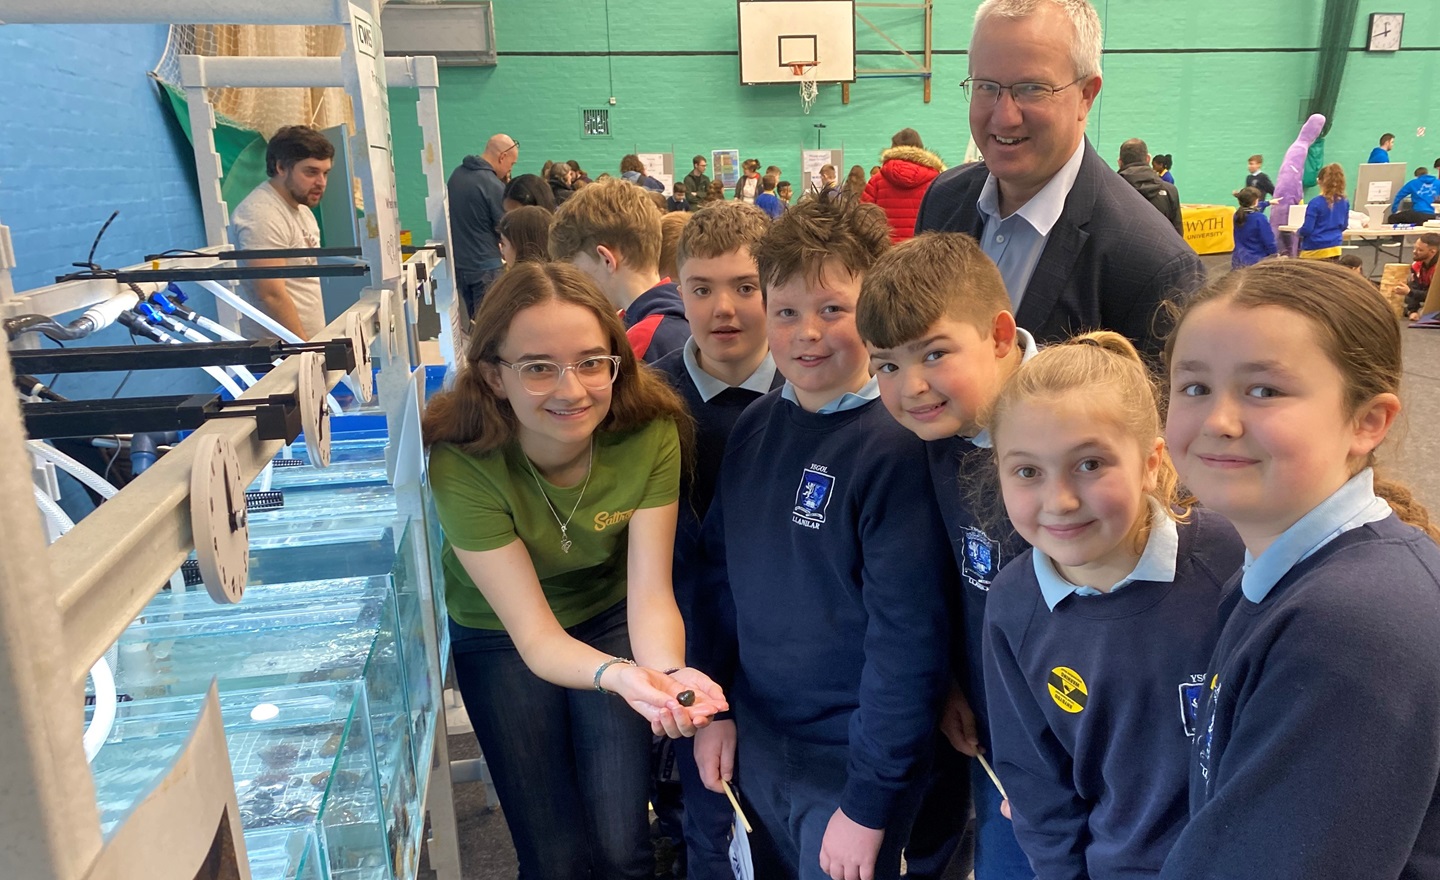 Left to right: Life Sciences student Elsa Larrad discusses how animals spend their time underwater with Ysgol Gynradd Gymunedol Llanilar pupils Rhun Lloyd, Osian Price, Thomas Sion Morgans, Elin Evans and Cati Jones, in the company of Aberystwyth University Vice-Chancellor, Professor Jon Timmis.